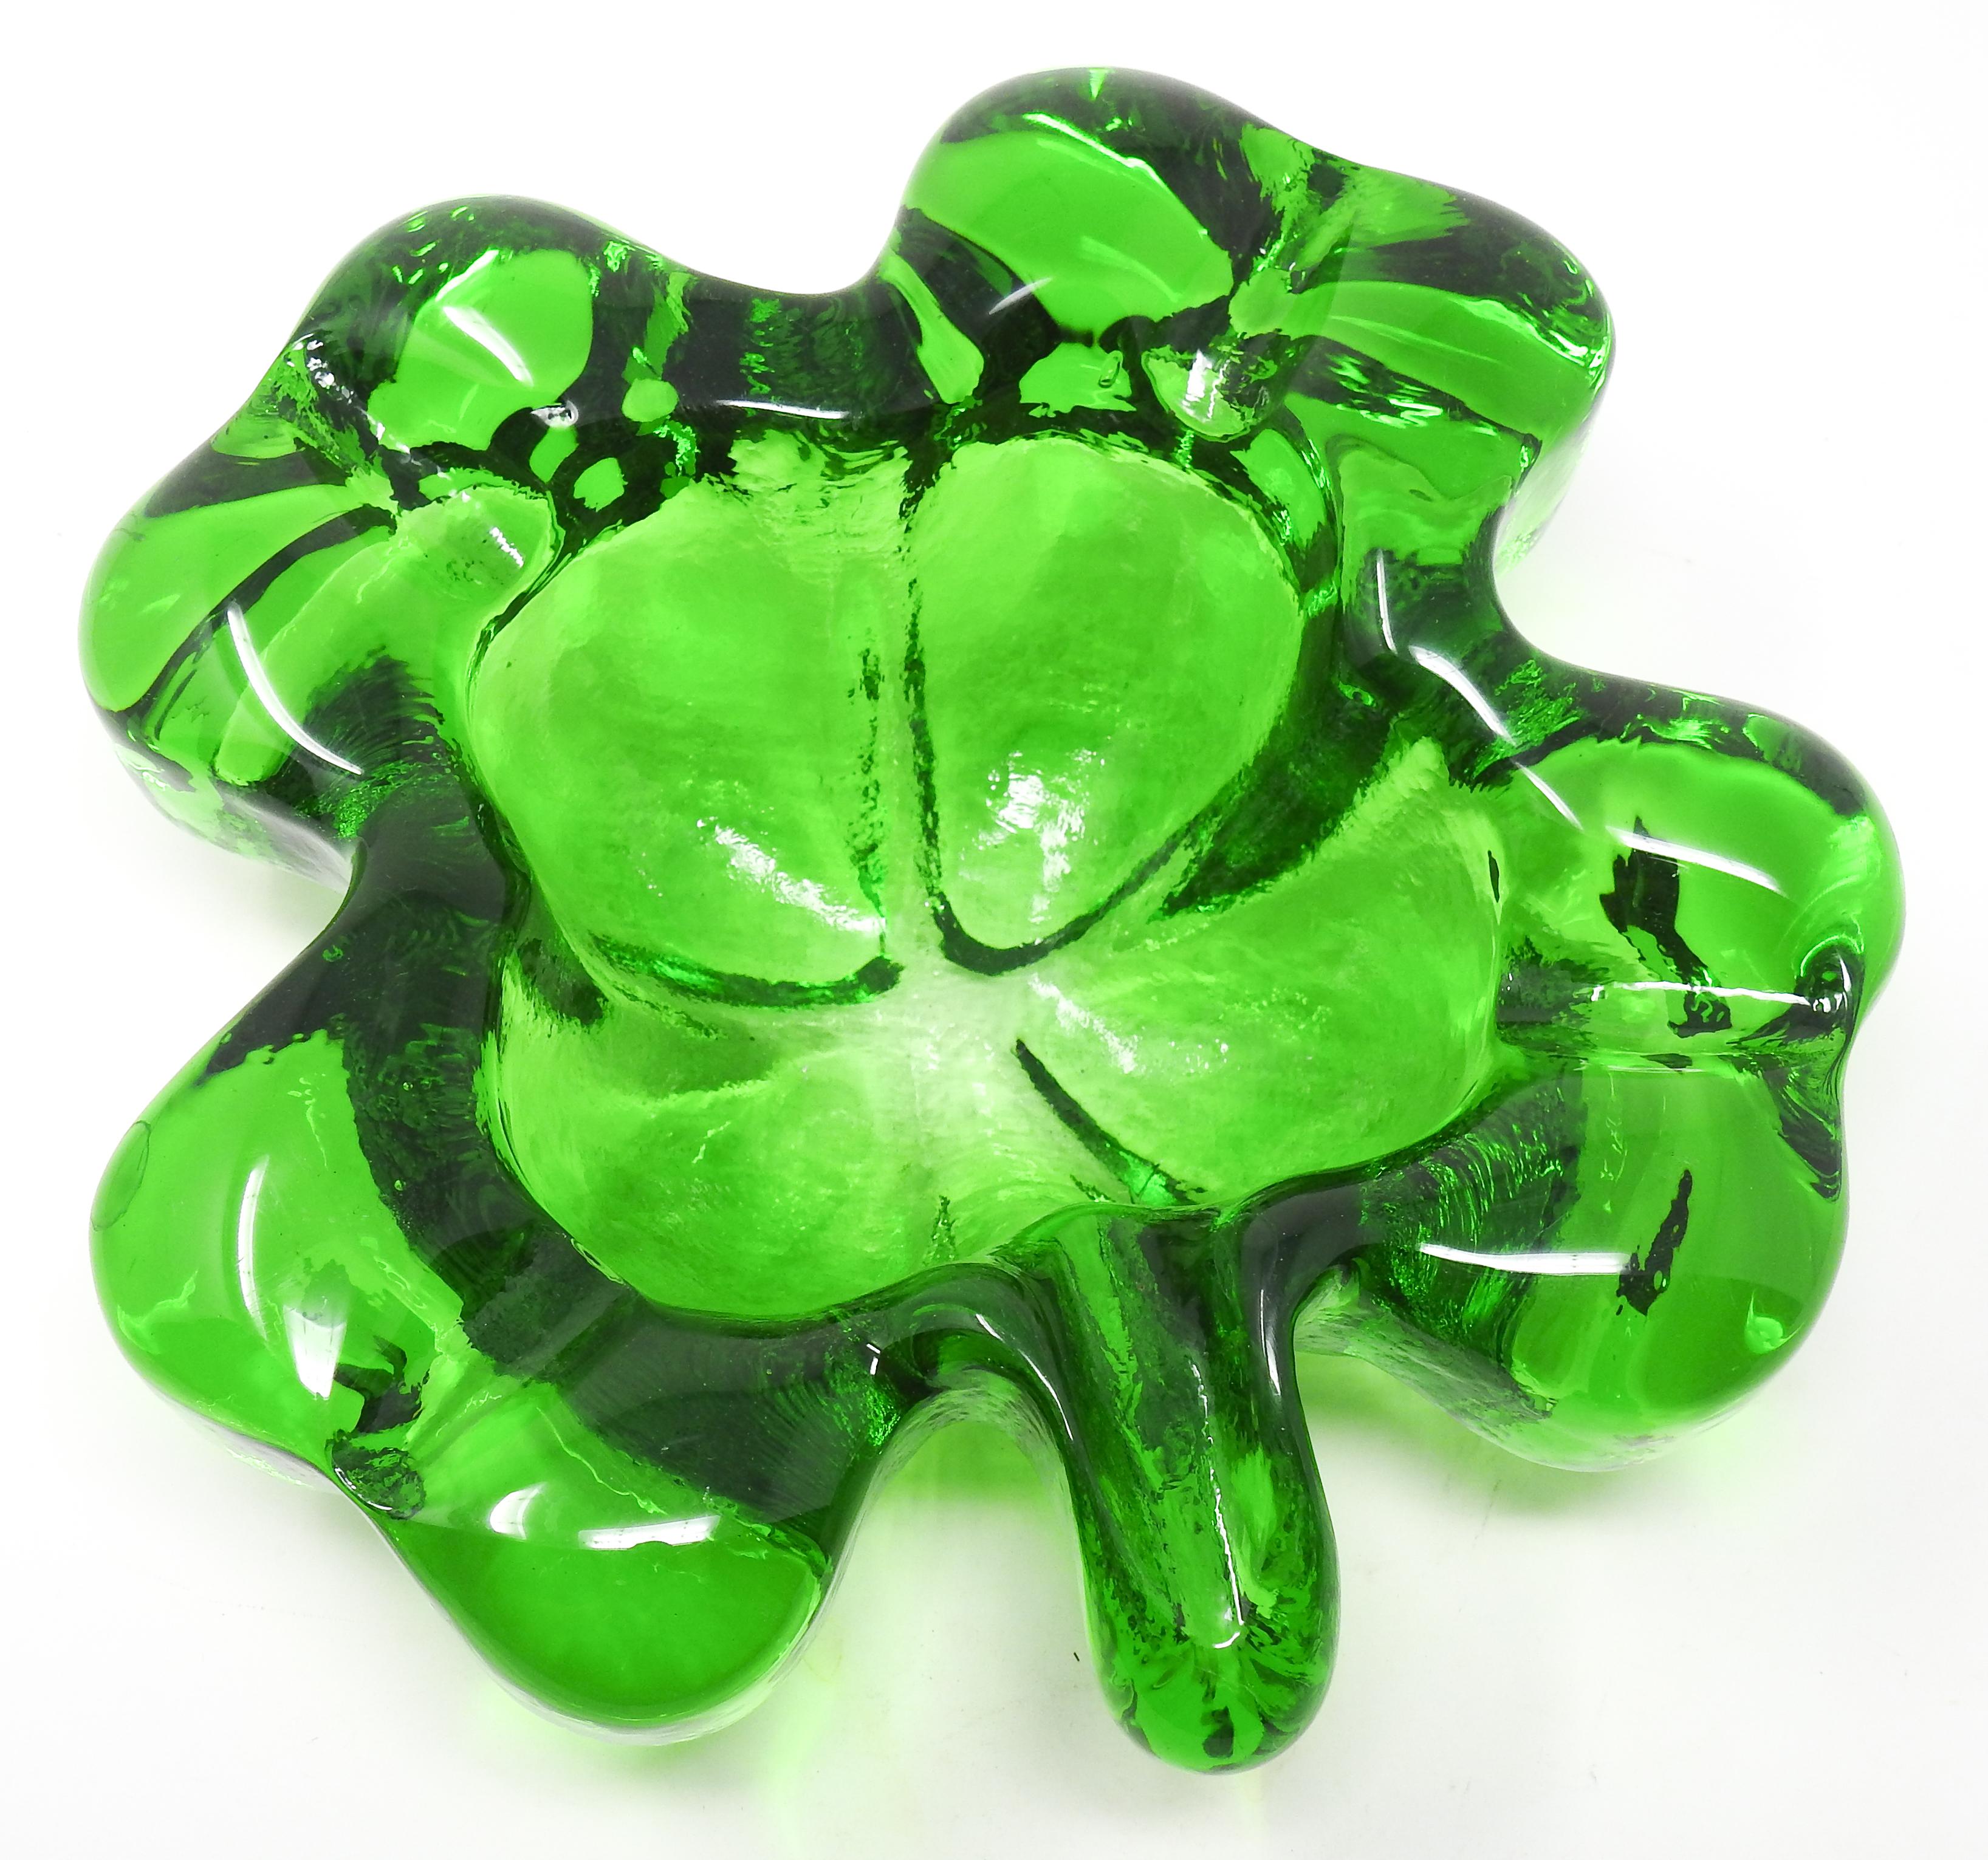 Offering this gorgeous blown glass clover ash receiver. Done is a vibrant green glass it throws light in all directions with all the curves. Each leaf has a resting spot and the stem is a resting spot as well.